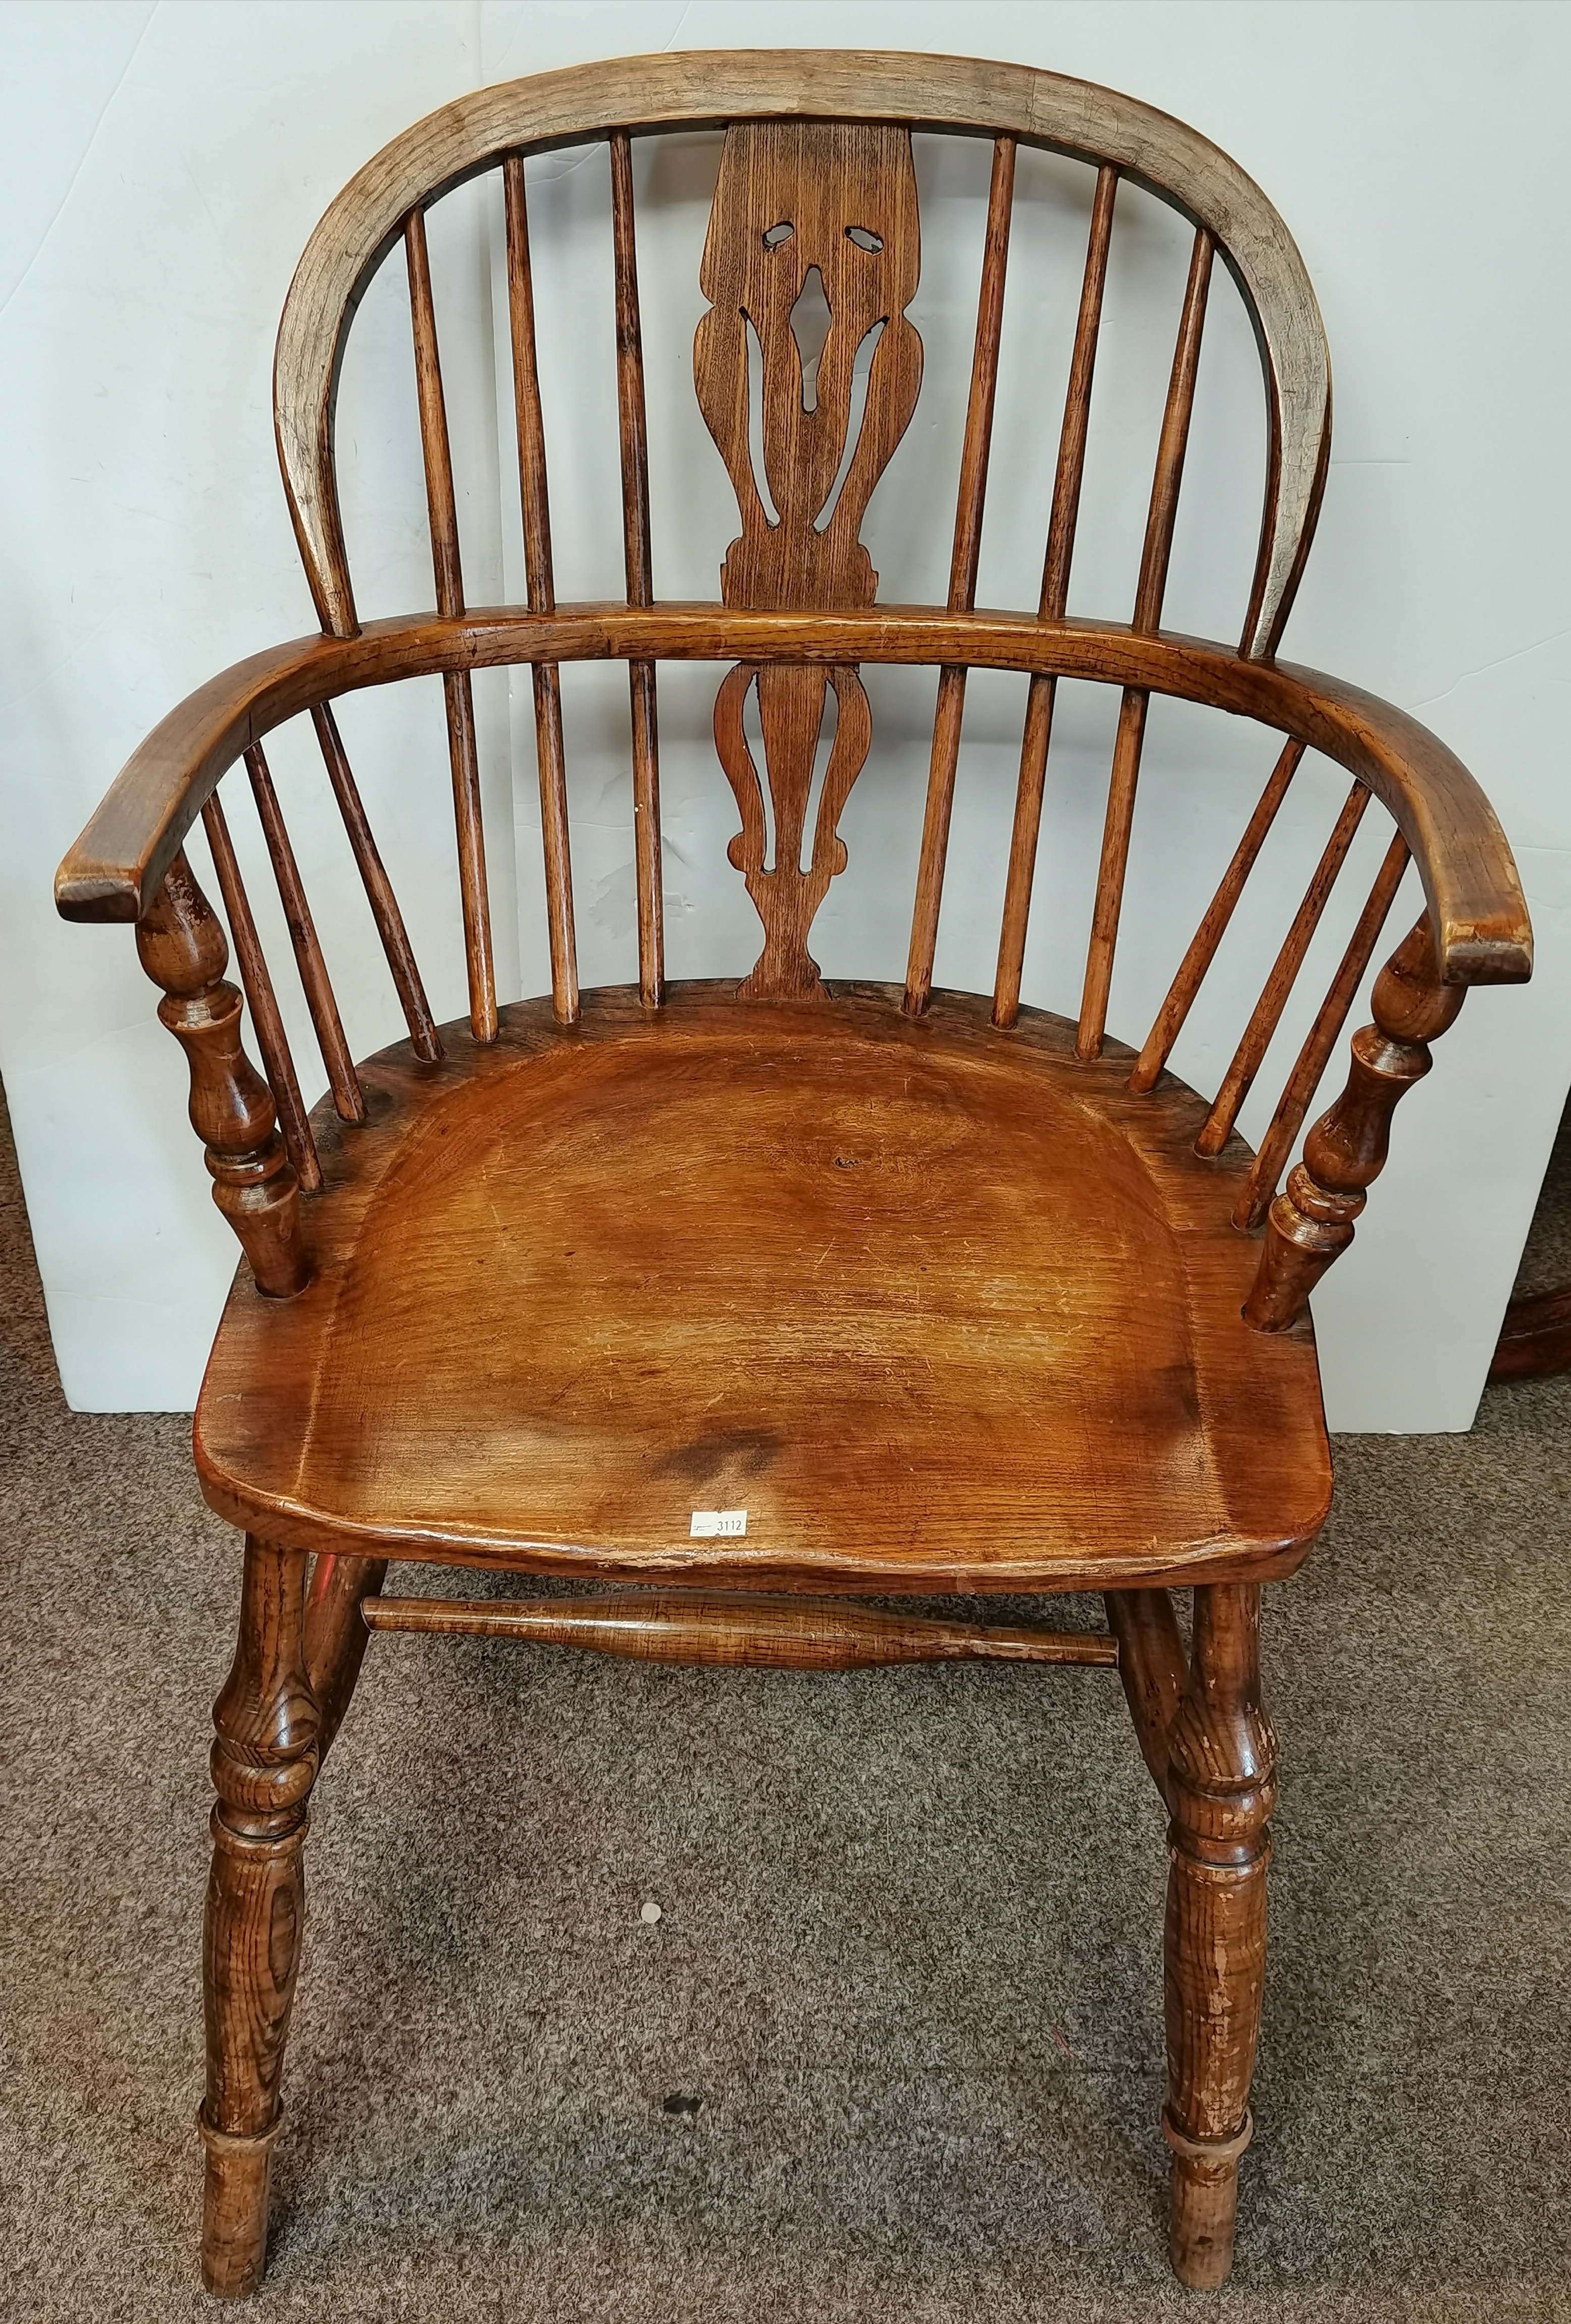 A low back Windsor chair with turned stretchers